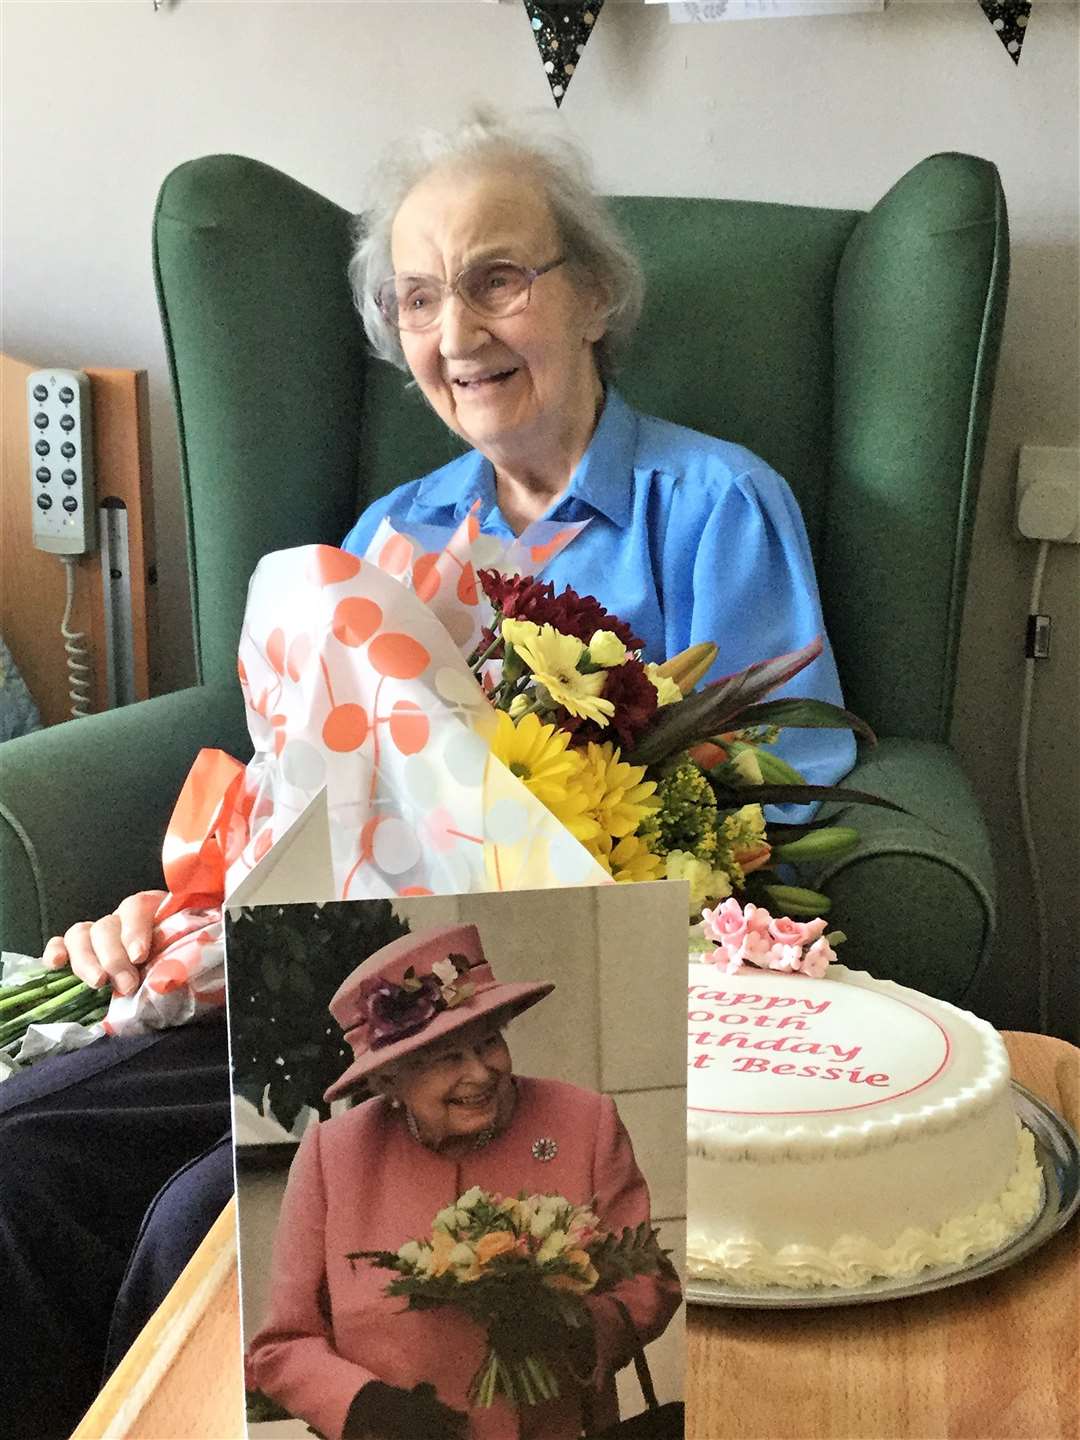 Bessie was thrilled to receive special birthday card from the Queen and set in in pride of place.